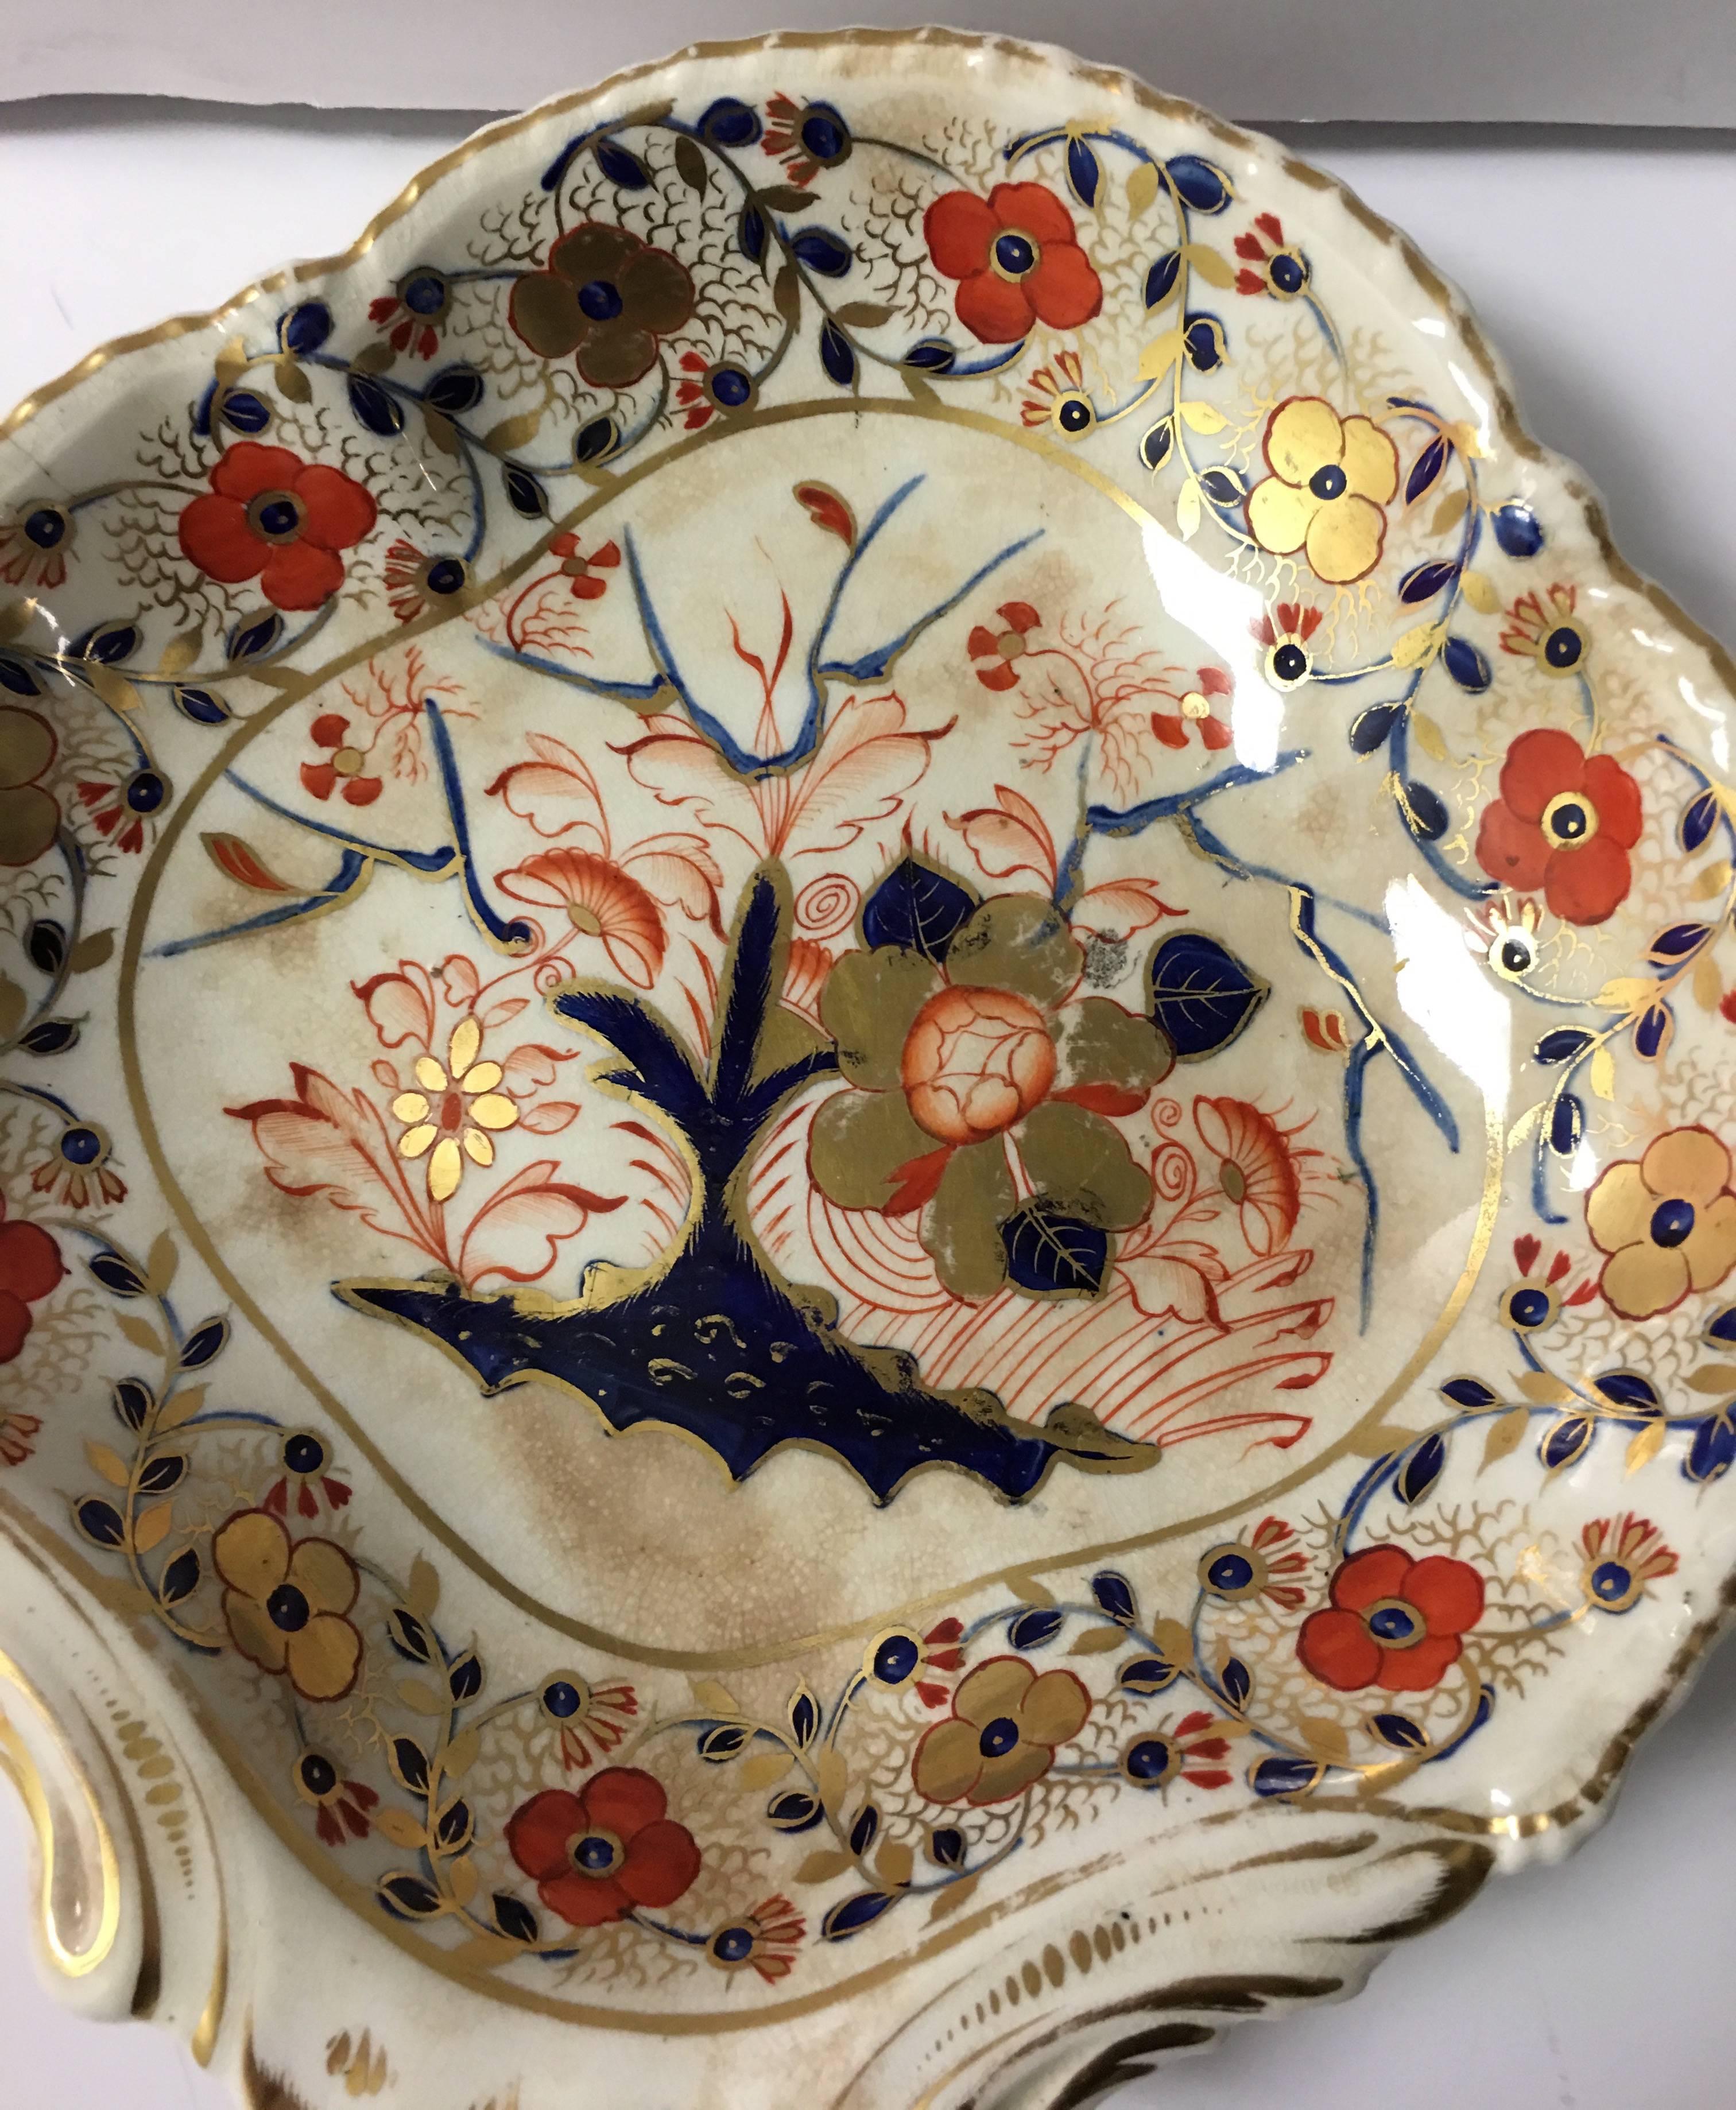 Early Royal Crown Derby Gadroon Asian Rose porcelain dessert dish. Scalloped edges with 22-karat gold painted detailing. All-over chinoiserie style floral pattern. Full Derby mark in red on the underside.